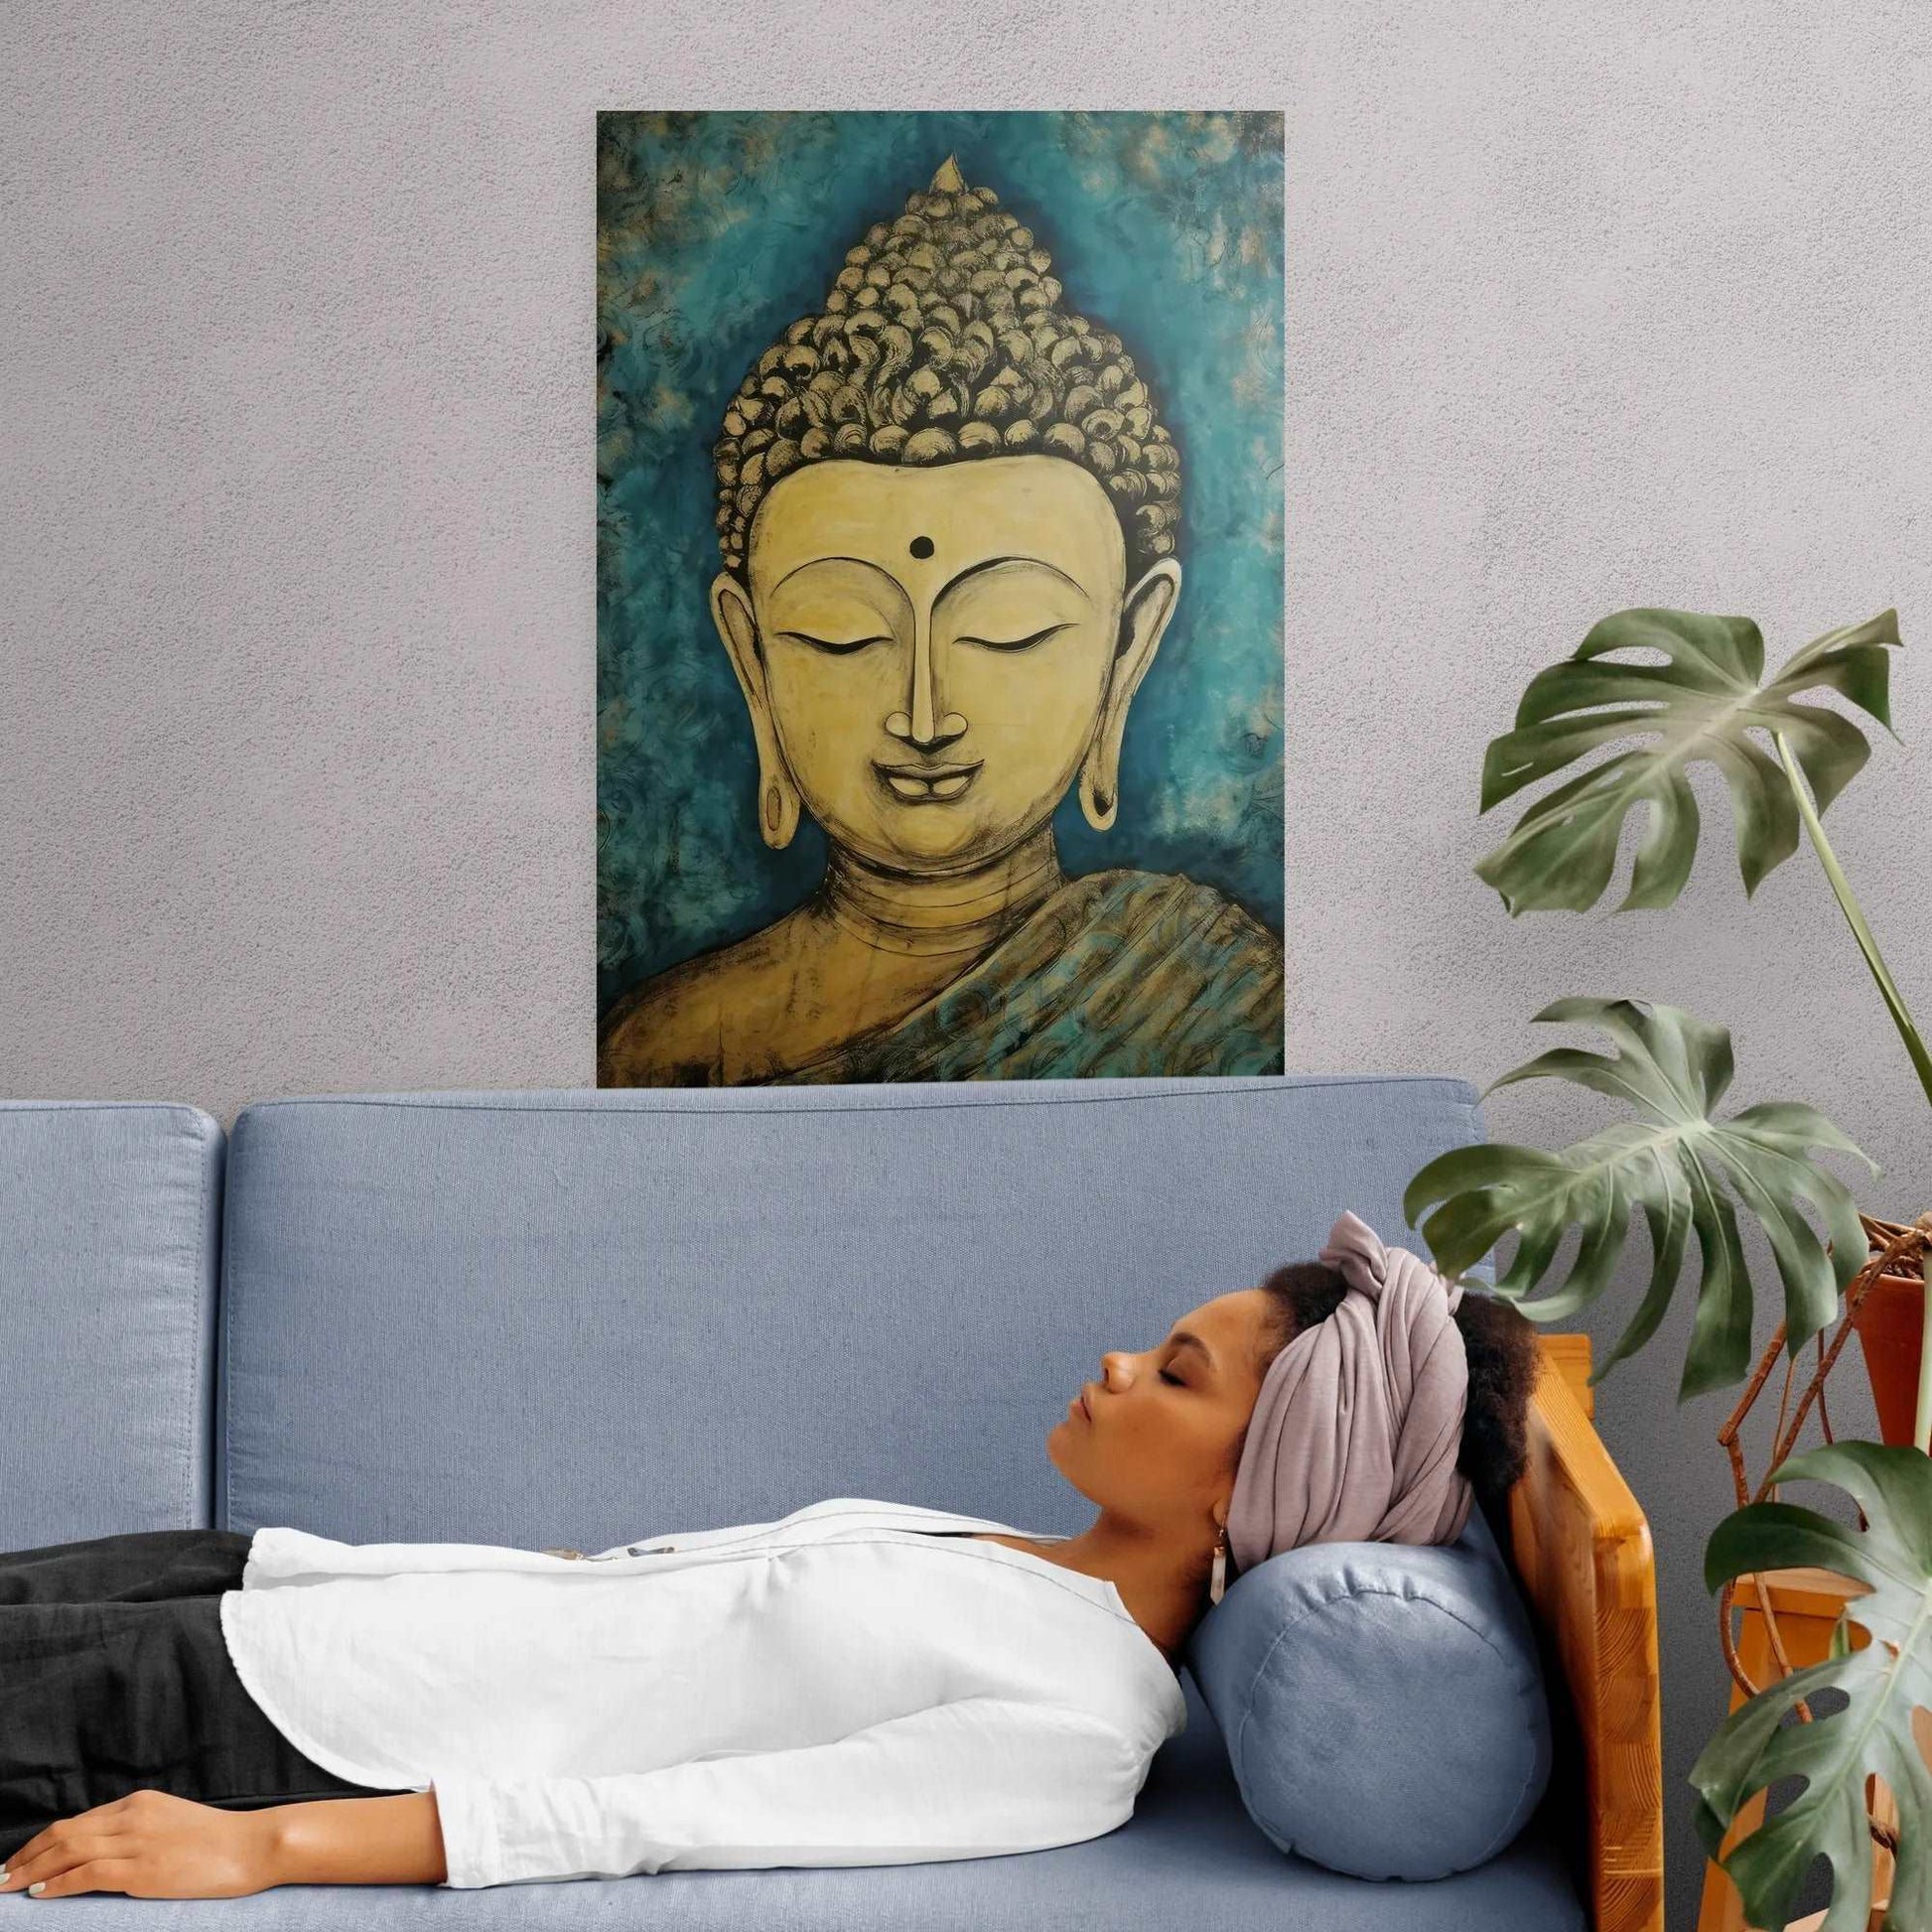 A peaceful Buddha painting in blue and gold tones oversees a relaxed woman lying on a couch, complementing a tranquil indoor plant-filled environment.